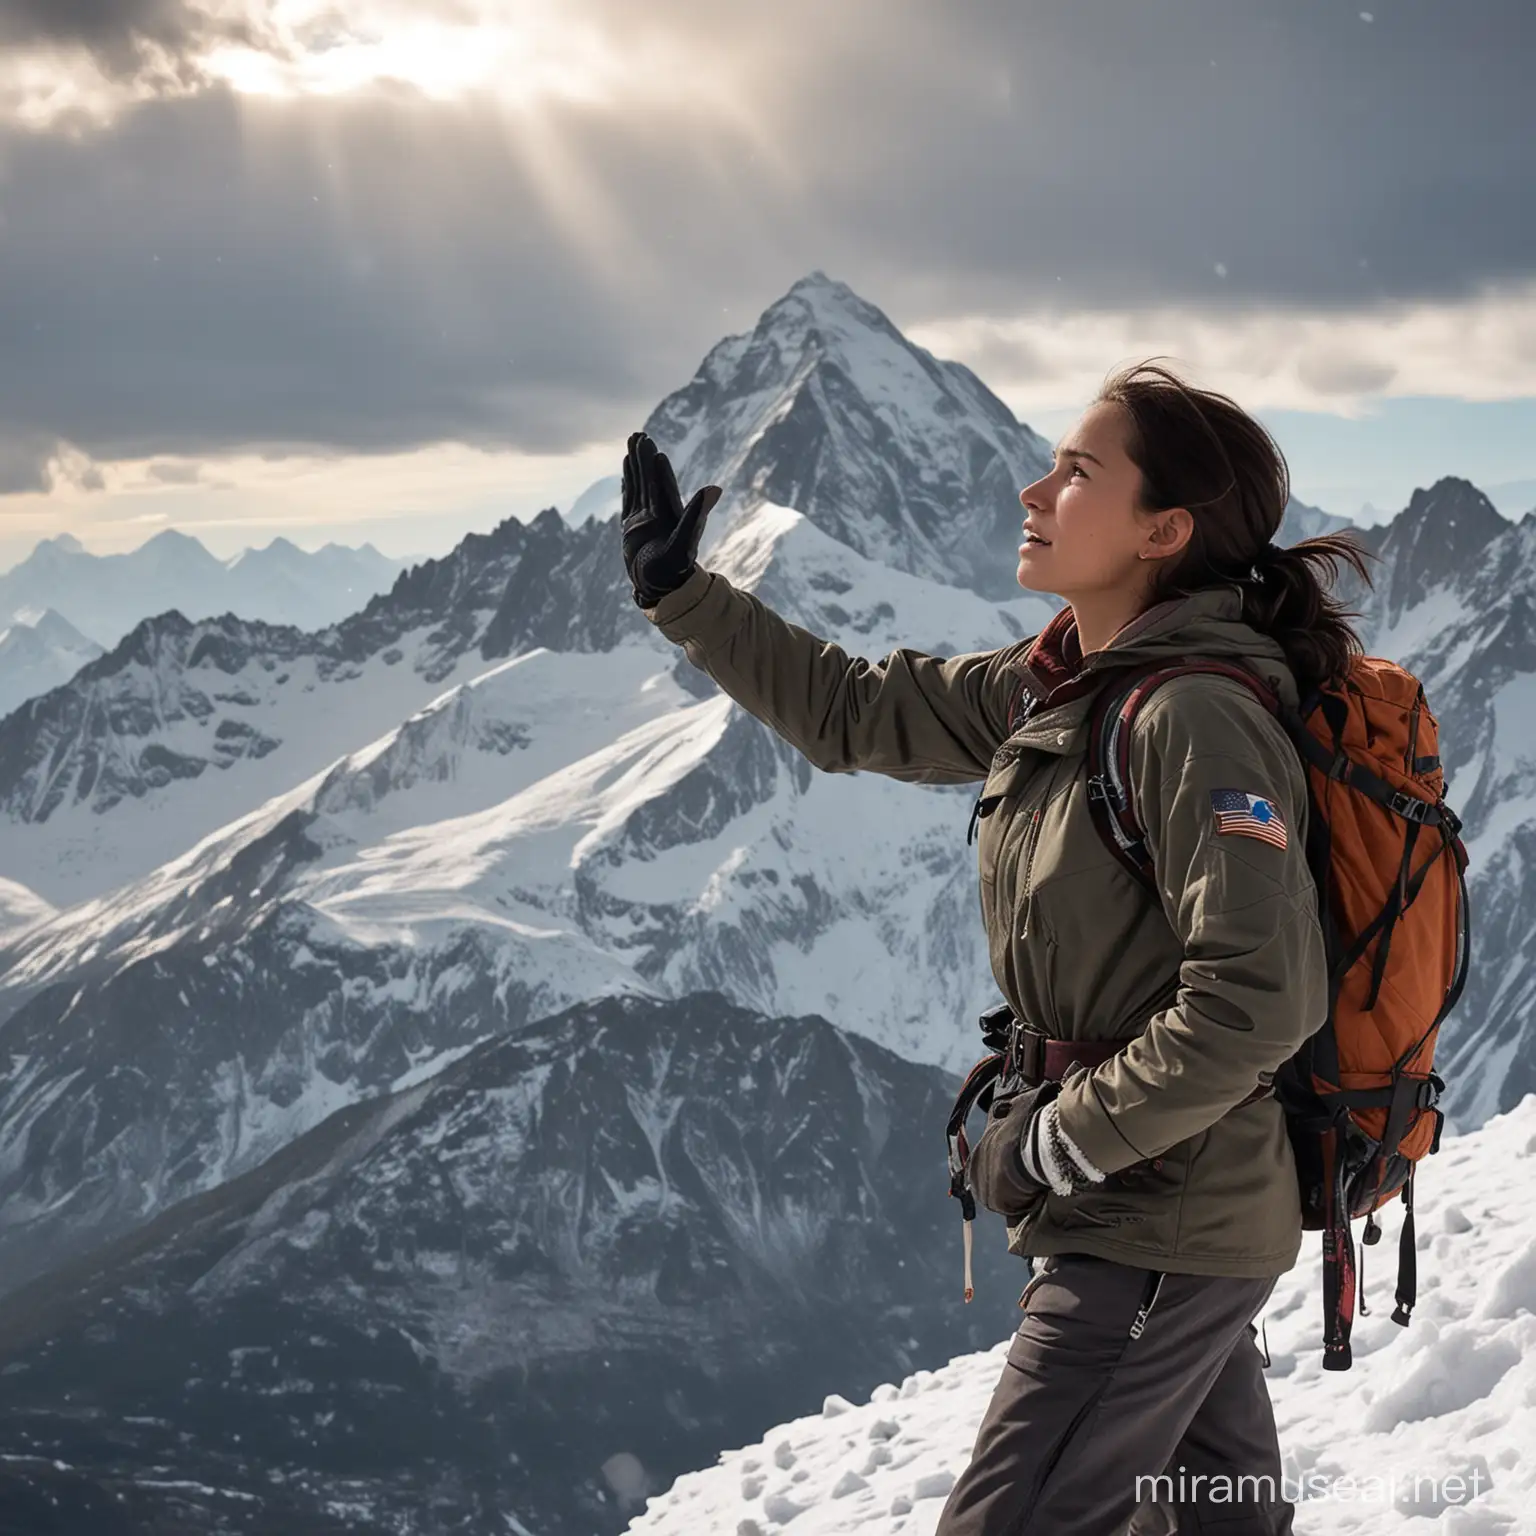 Triumphant Mountaineer Conquers SnowCapped Summit